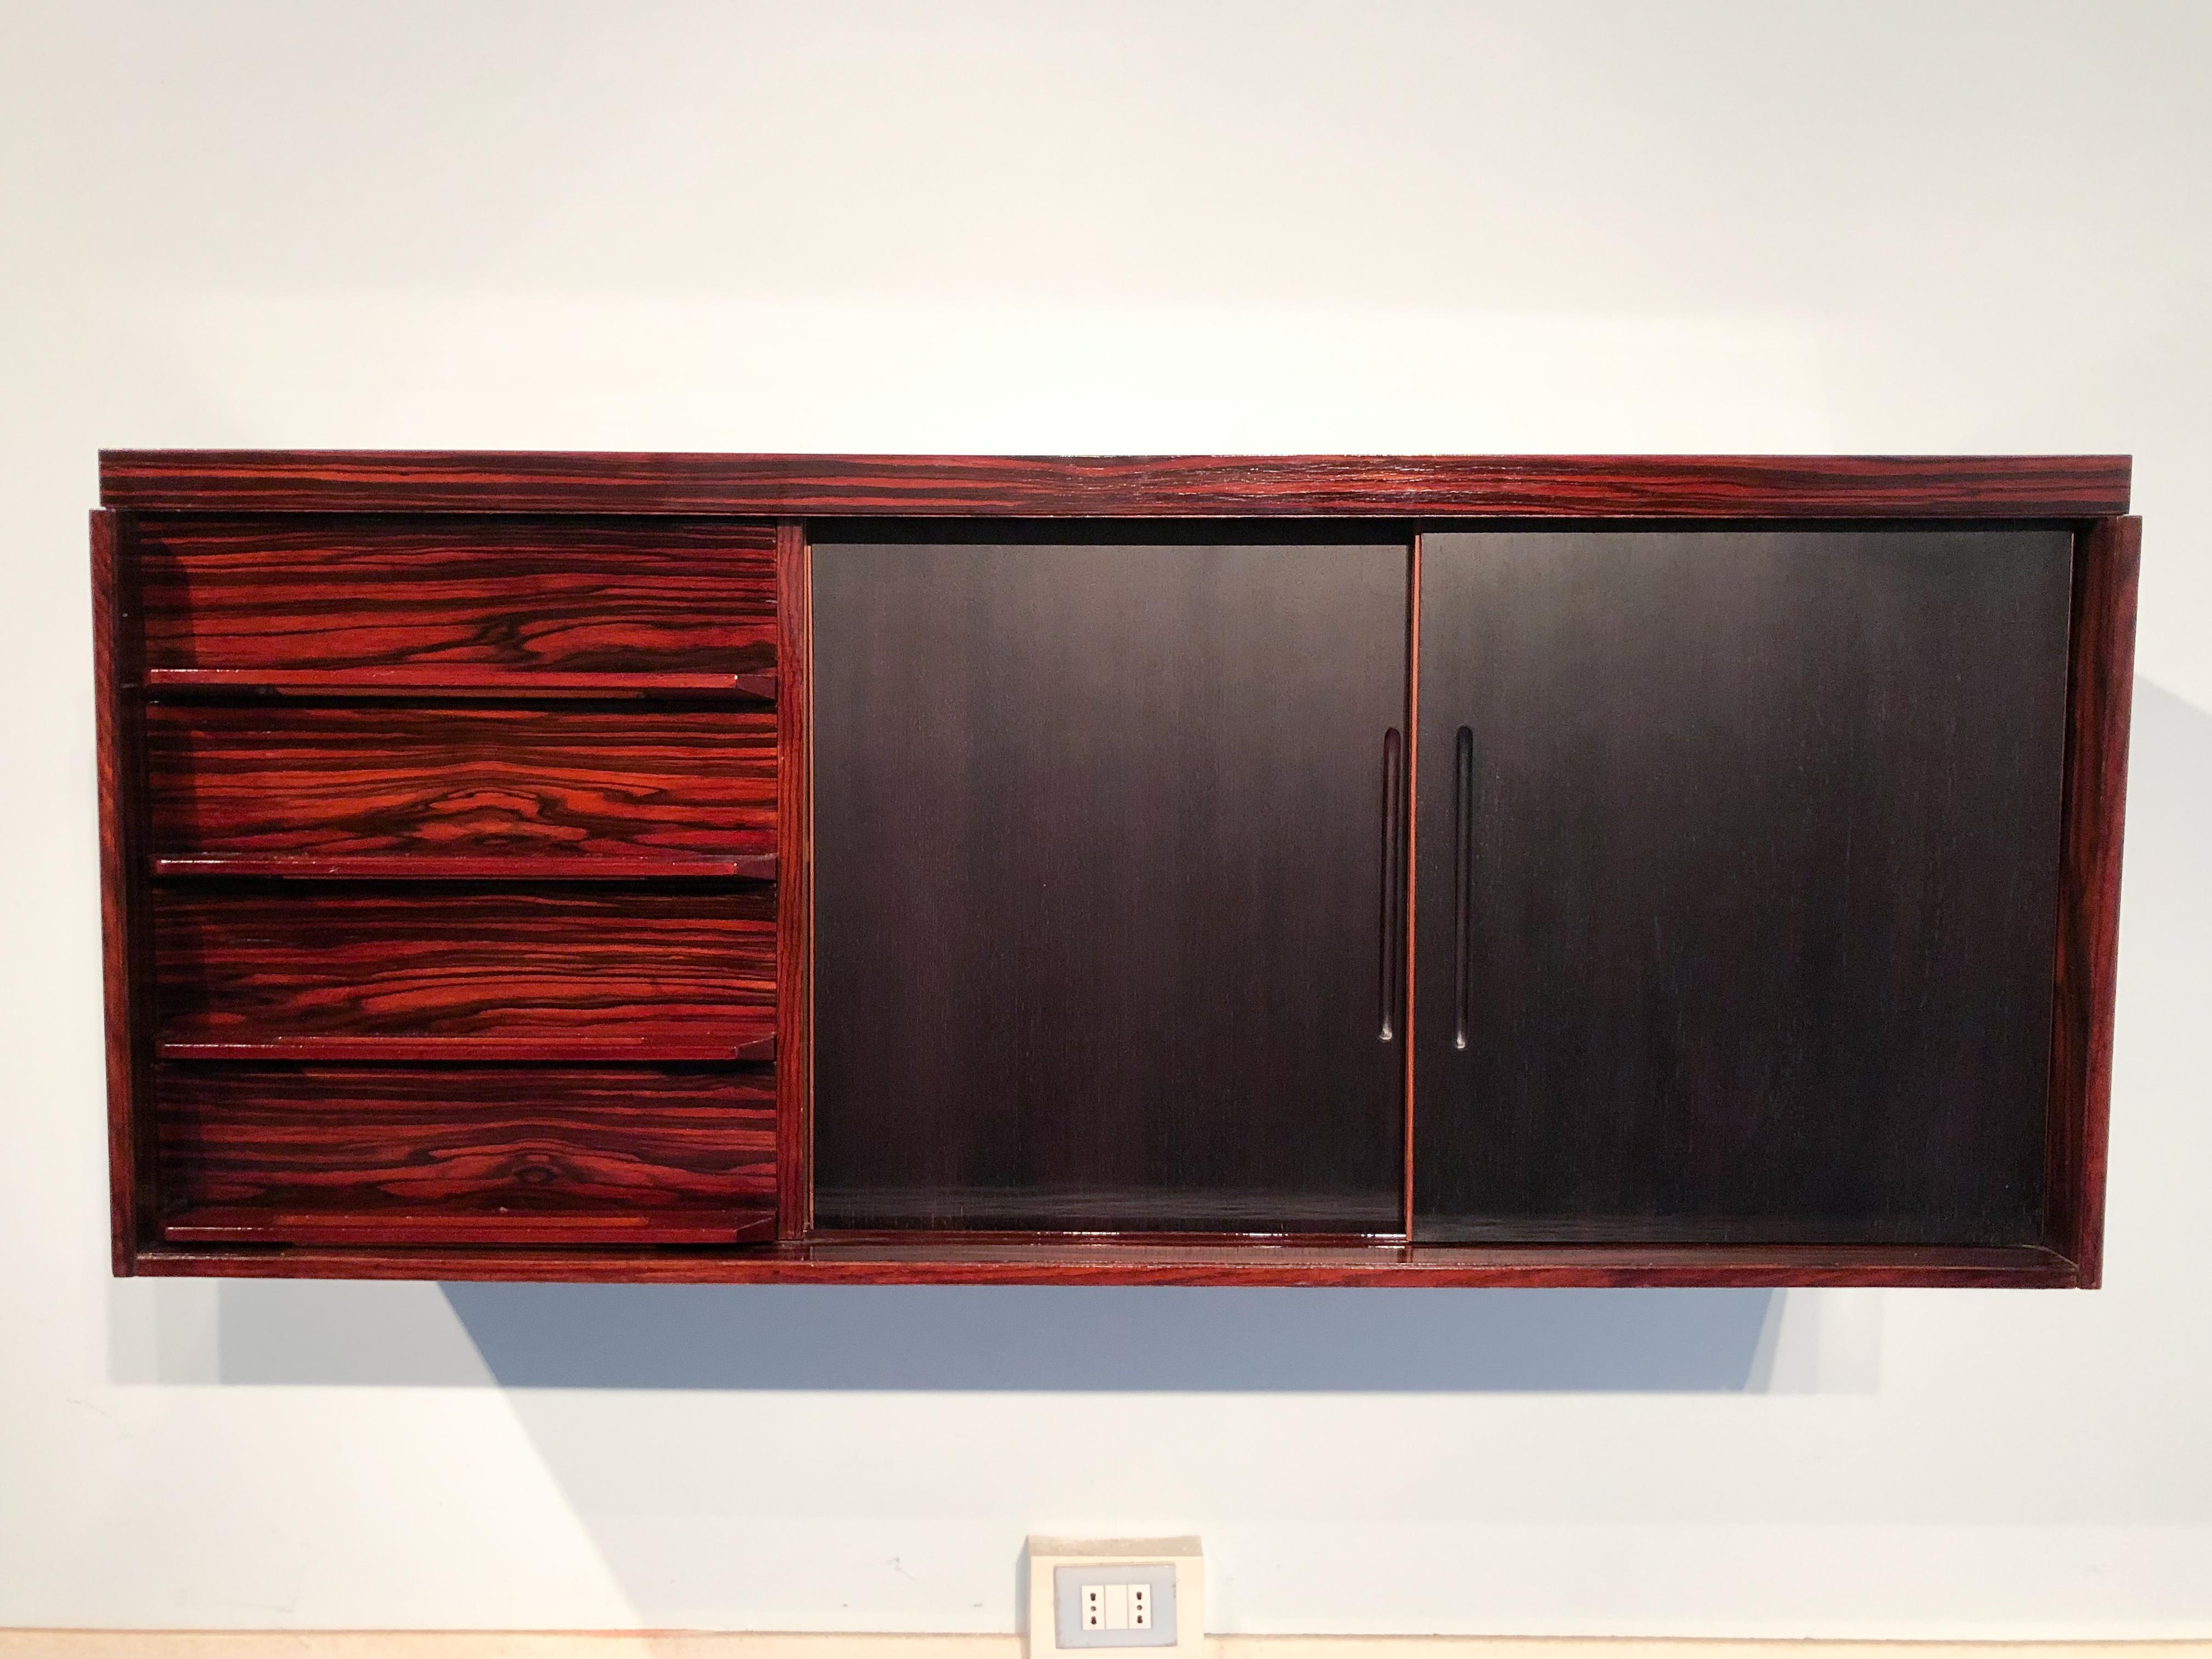 Italian Mid-Century Modern wall mounted sideboard in precious Macassar ebony from the 1950s. The suspended sideboard has a very refined drawers design and maple interiors. The innovative contrast between the matte black lacquered sliding doors and